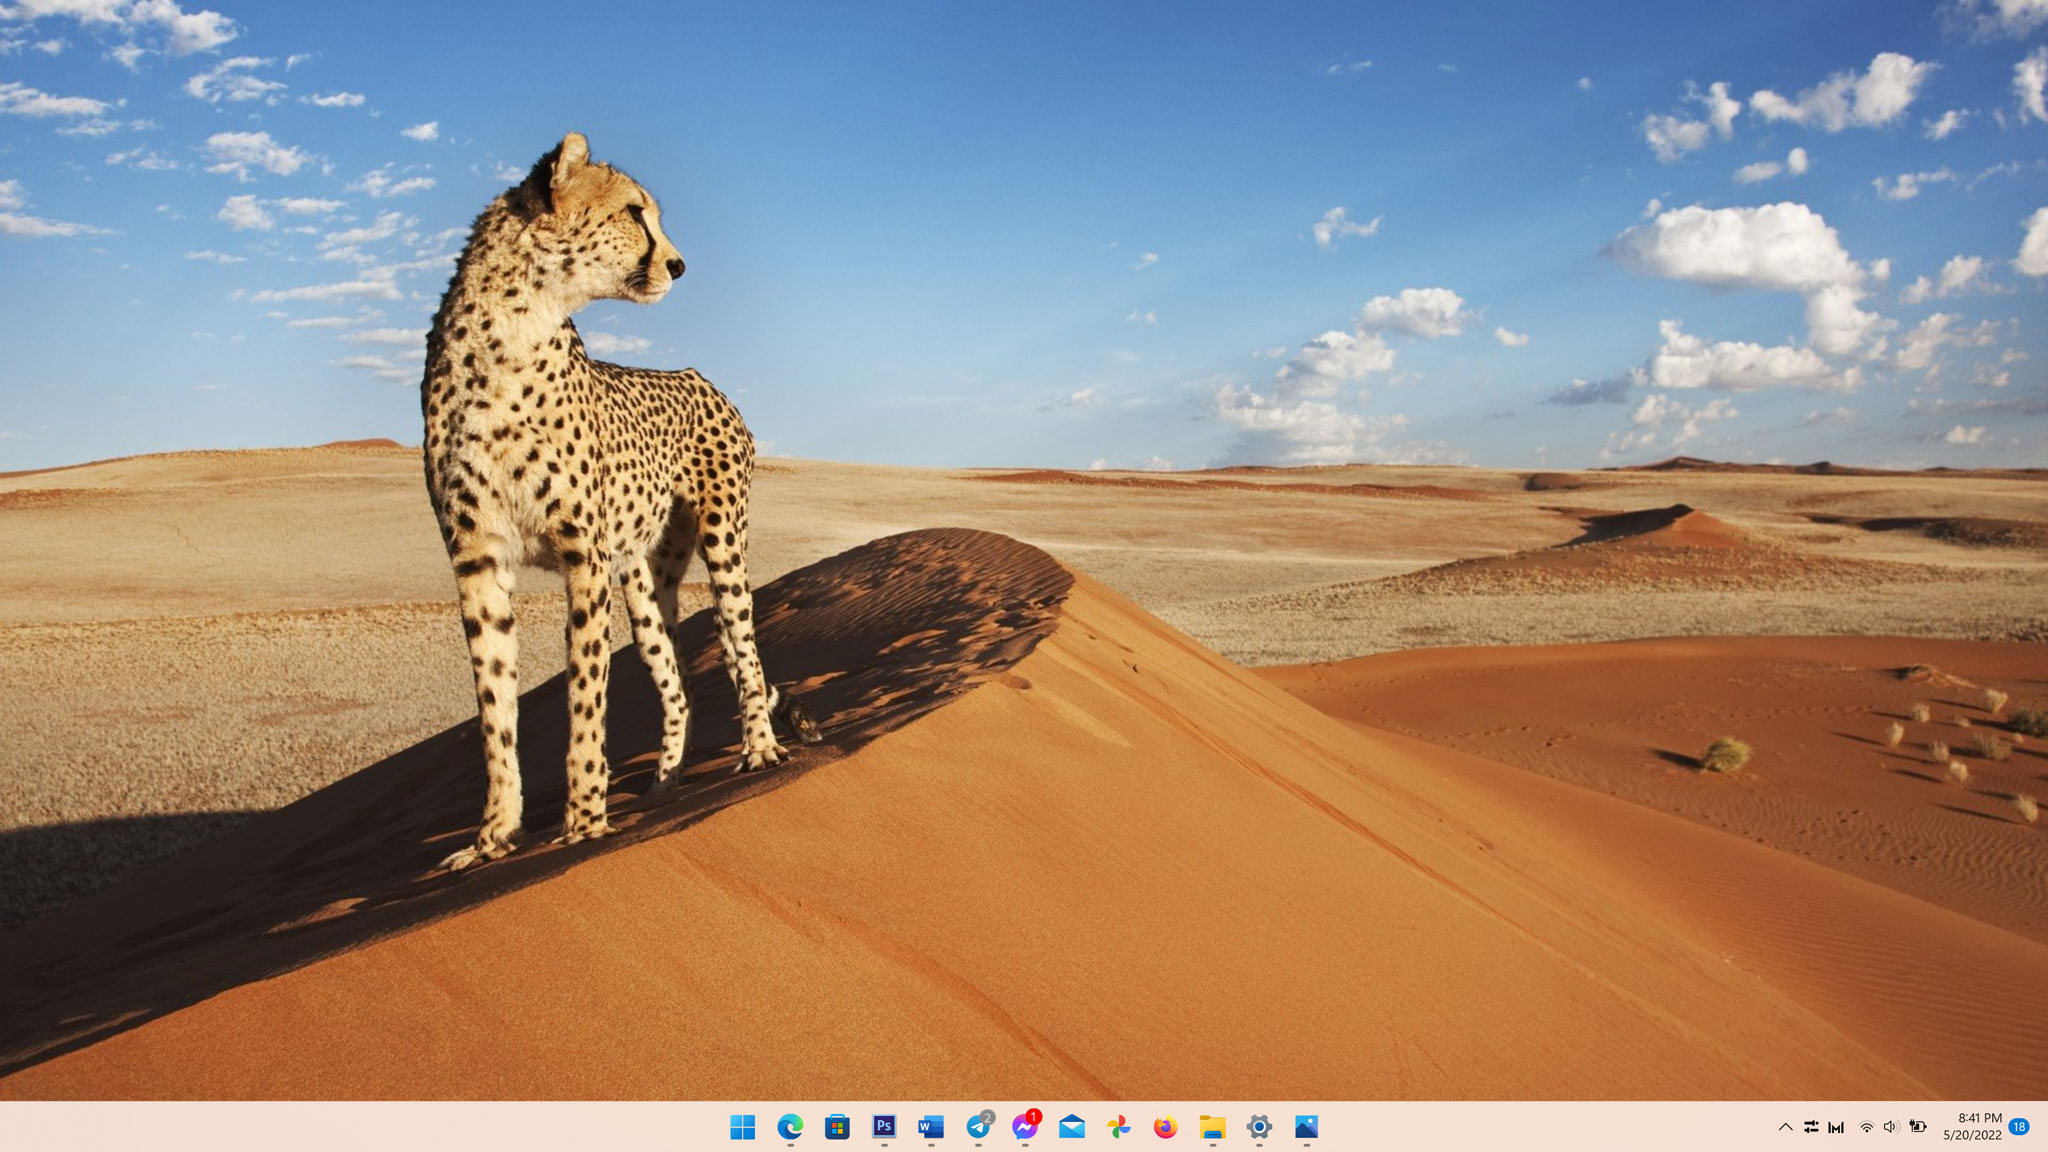 Want to keep your desktop lively without having to manually change your wallpaper every day? Let Windows 11 do the work for you with its automatic hình nền máy tính setting! With a simple click, your desktop background will change regularly to give you a fresh look every time you turn on your computer. Check out the image to see how to enable this feature.